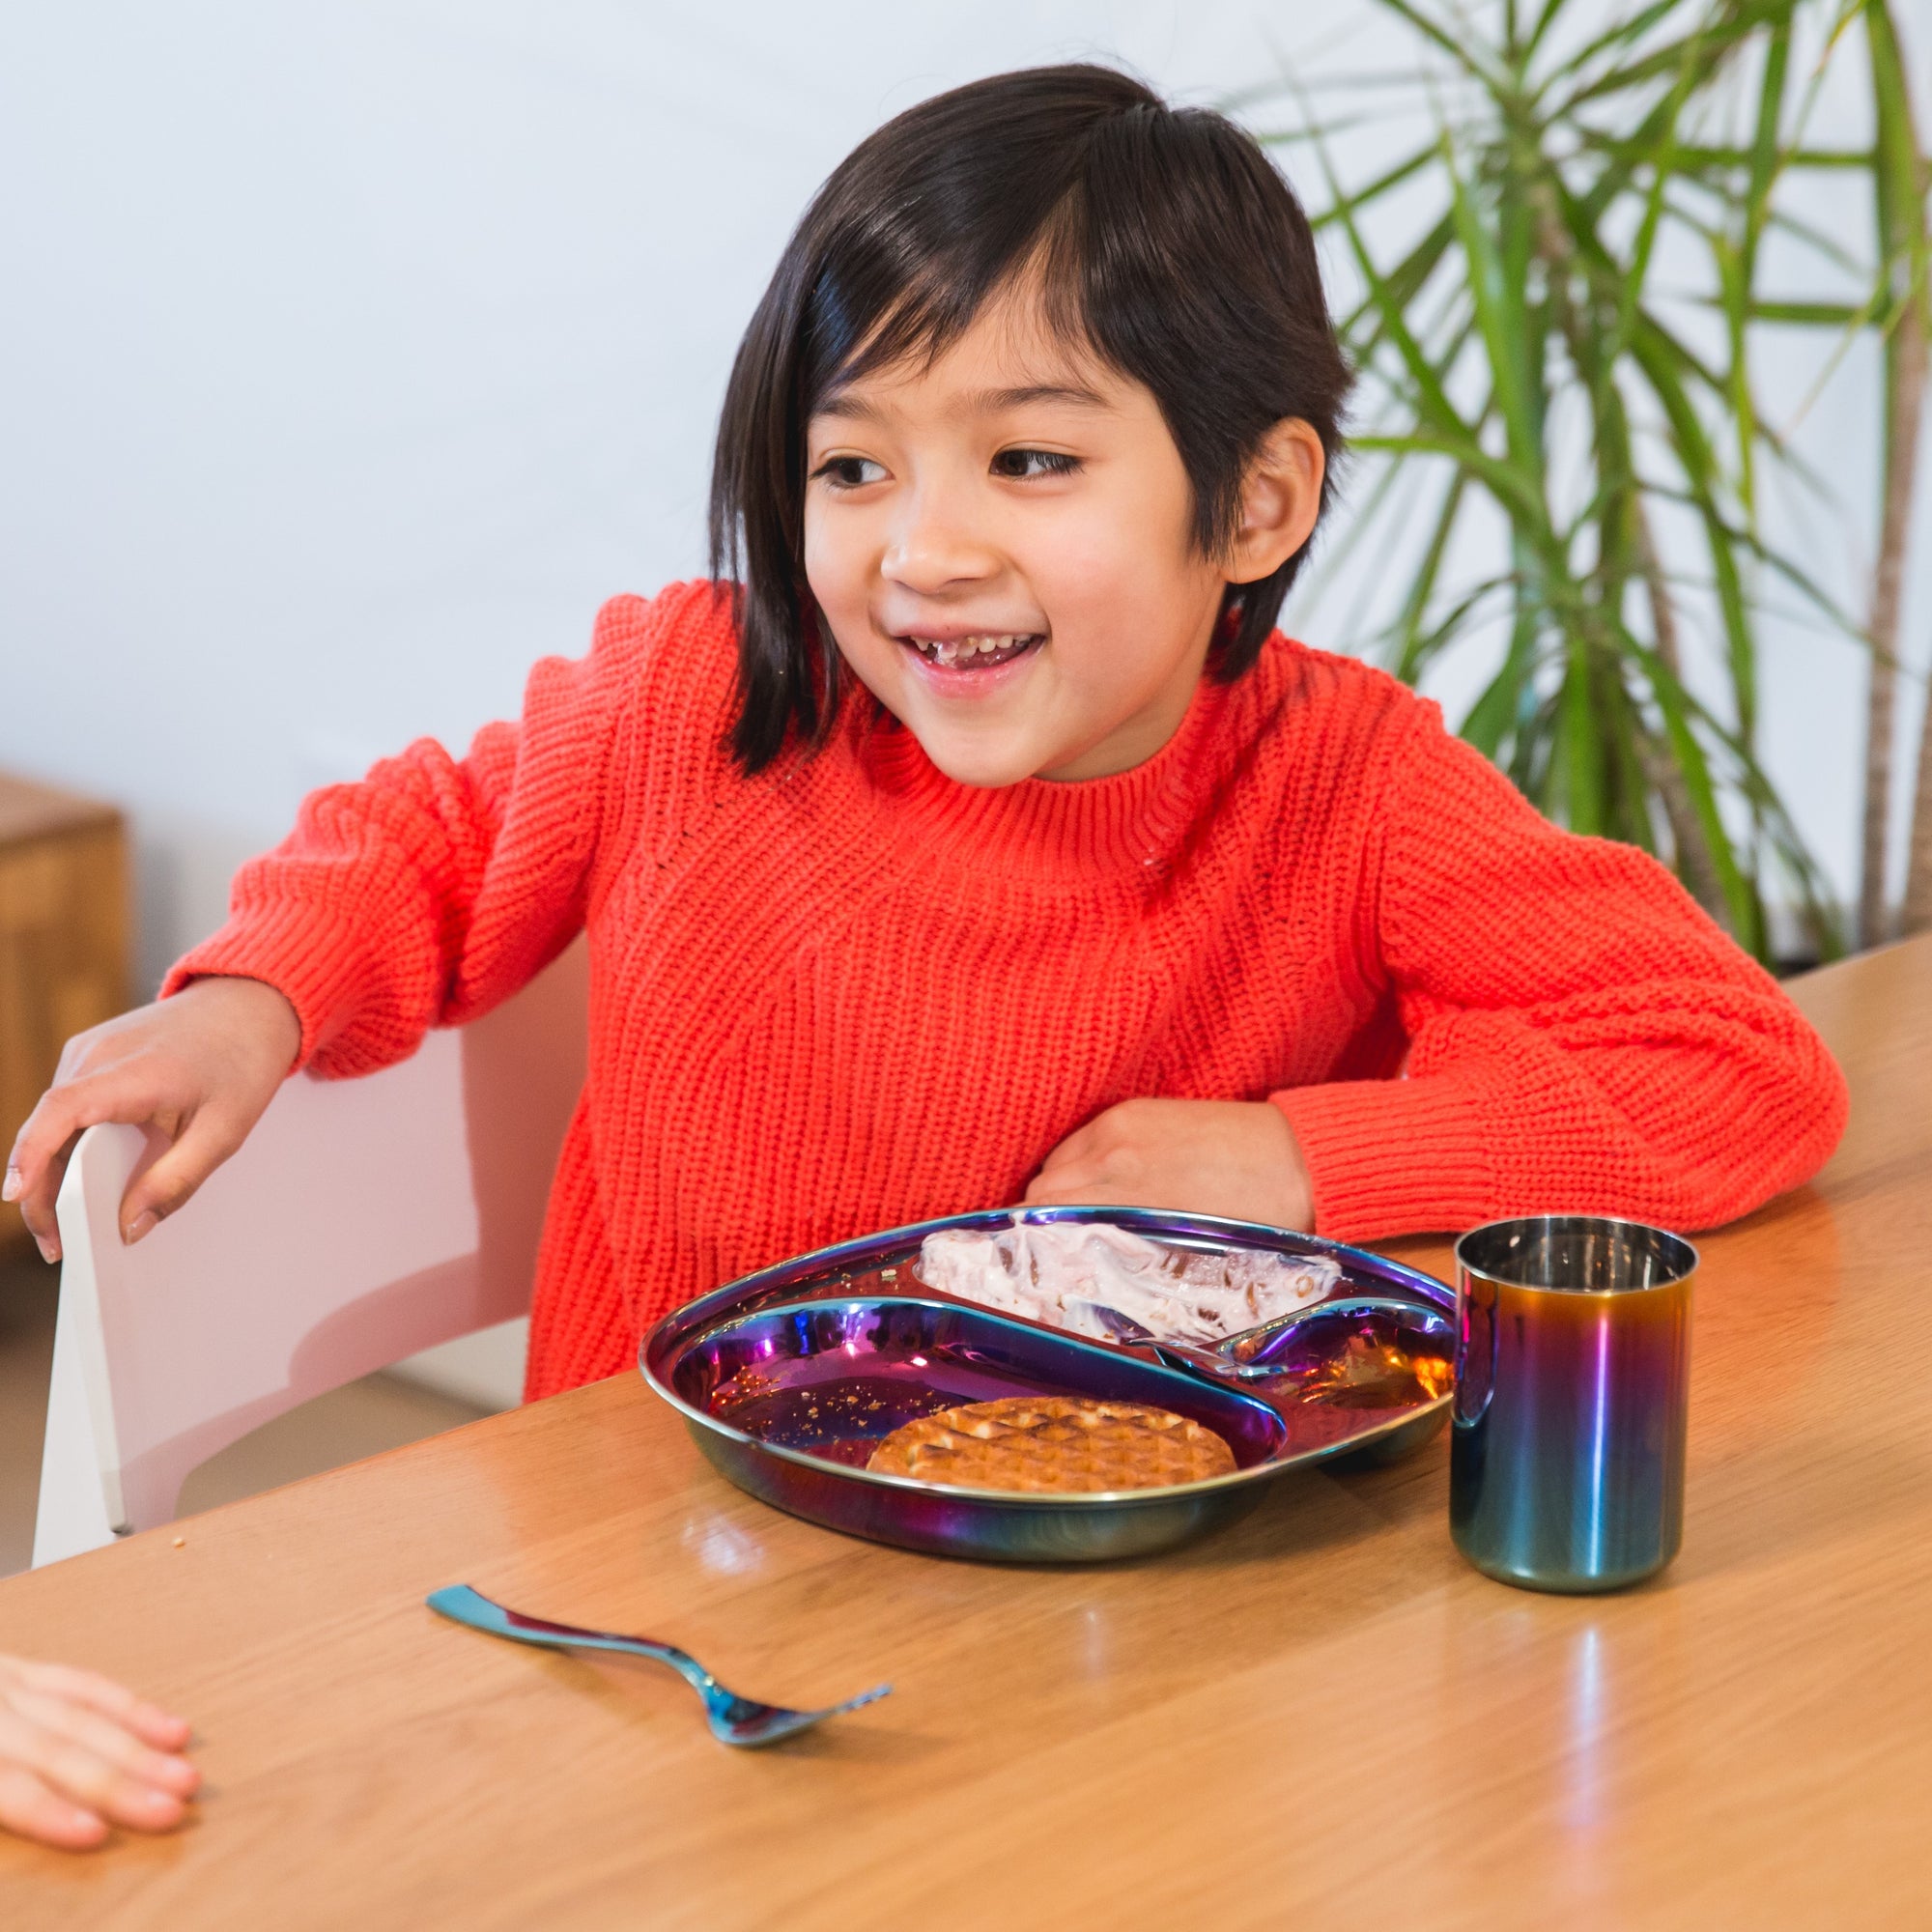 Toddlers learn through exploration of the world around them. By providing structured mealtimes at the dining table, supportive social interaction and guidance while eating - your child will learn about social rules like manners and behaviors